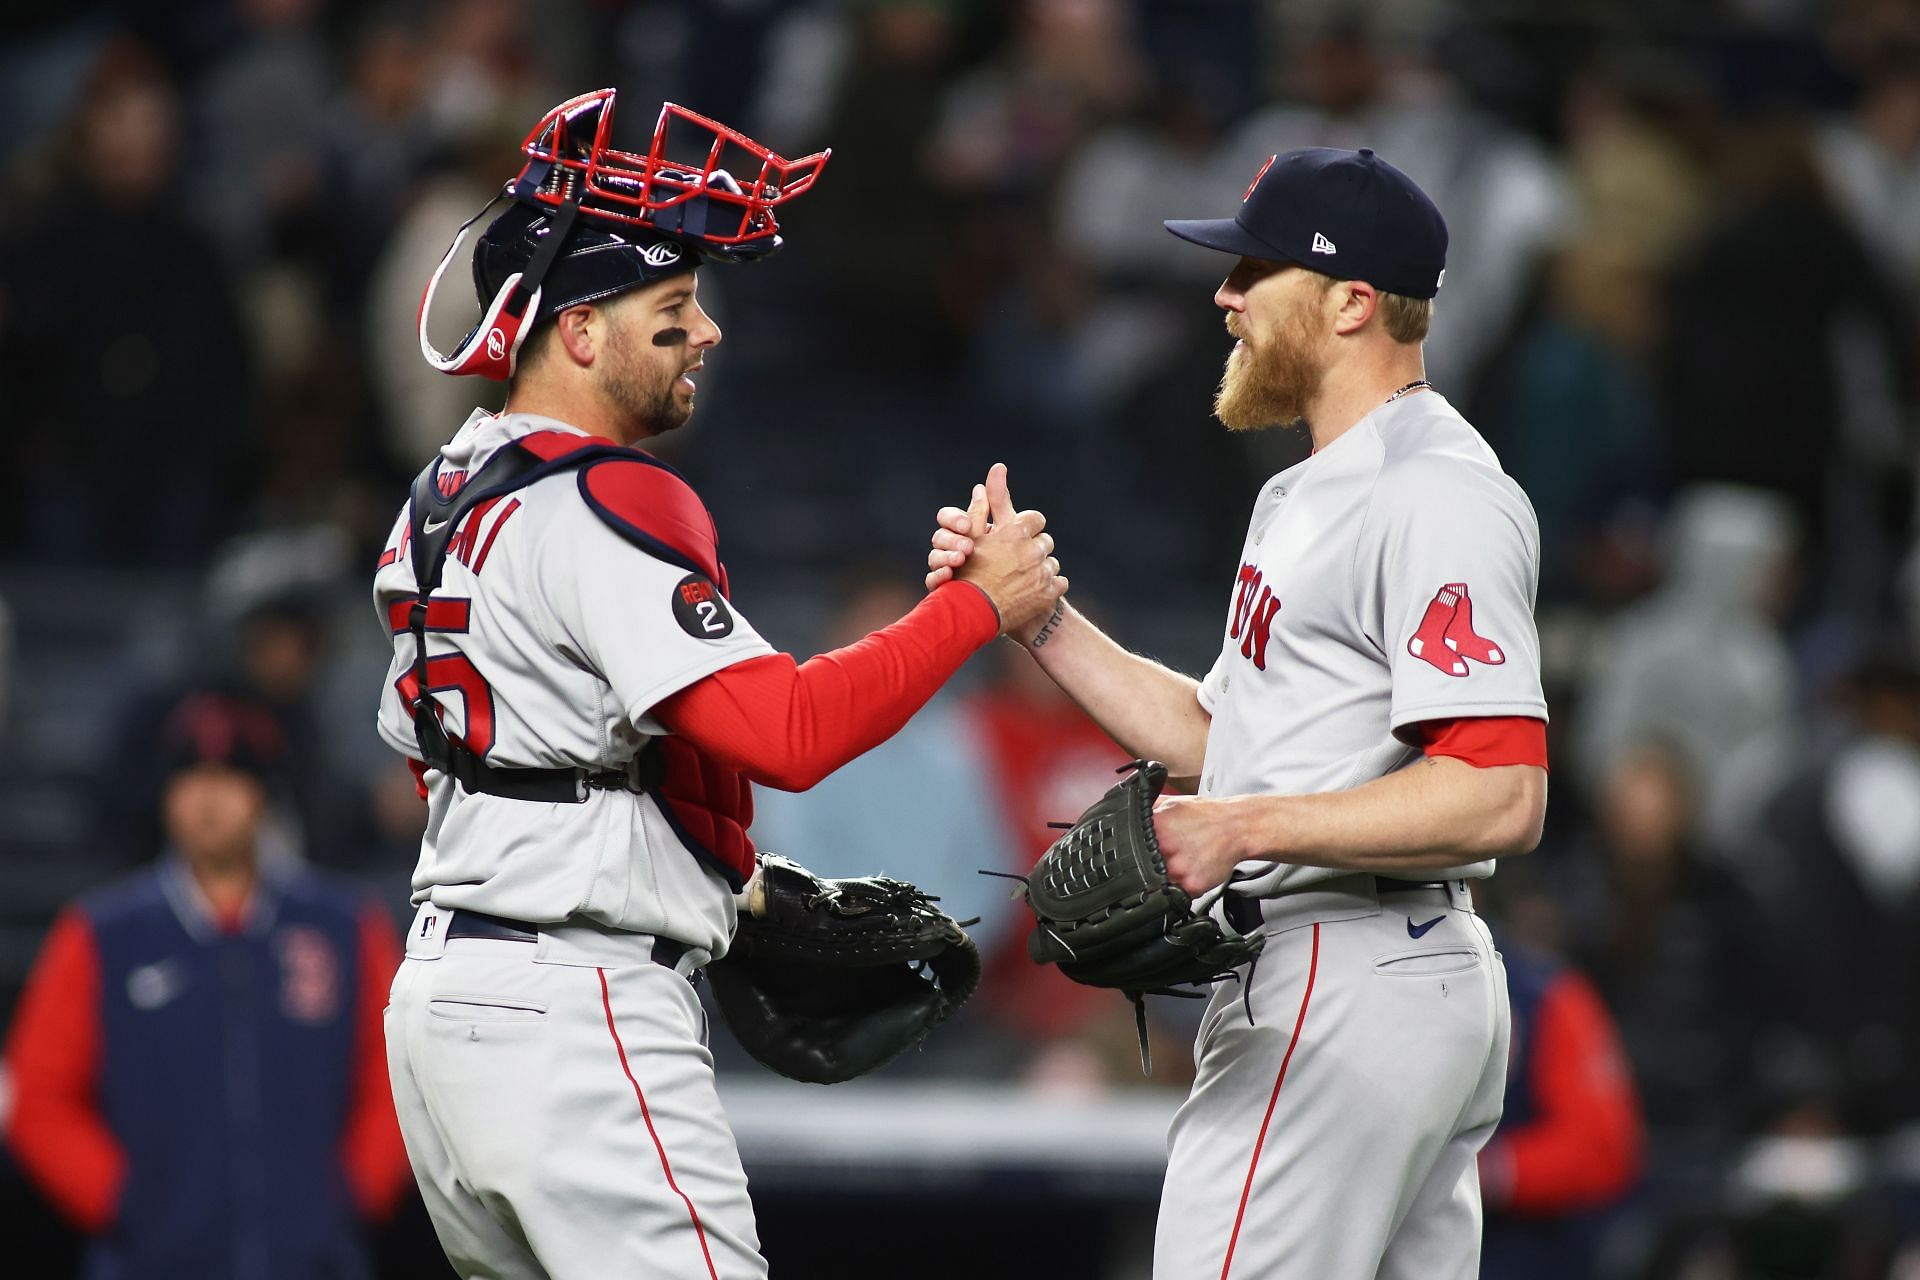 Jake Diekman records the save against New York Yankees, giving the Boston Red Sox their first victory of the 2022 season